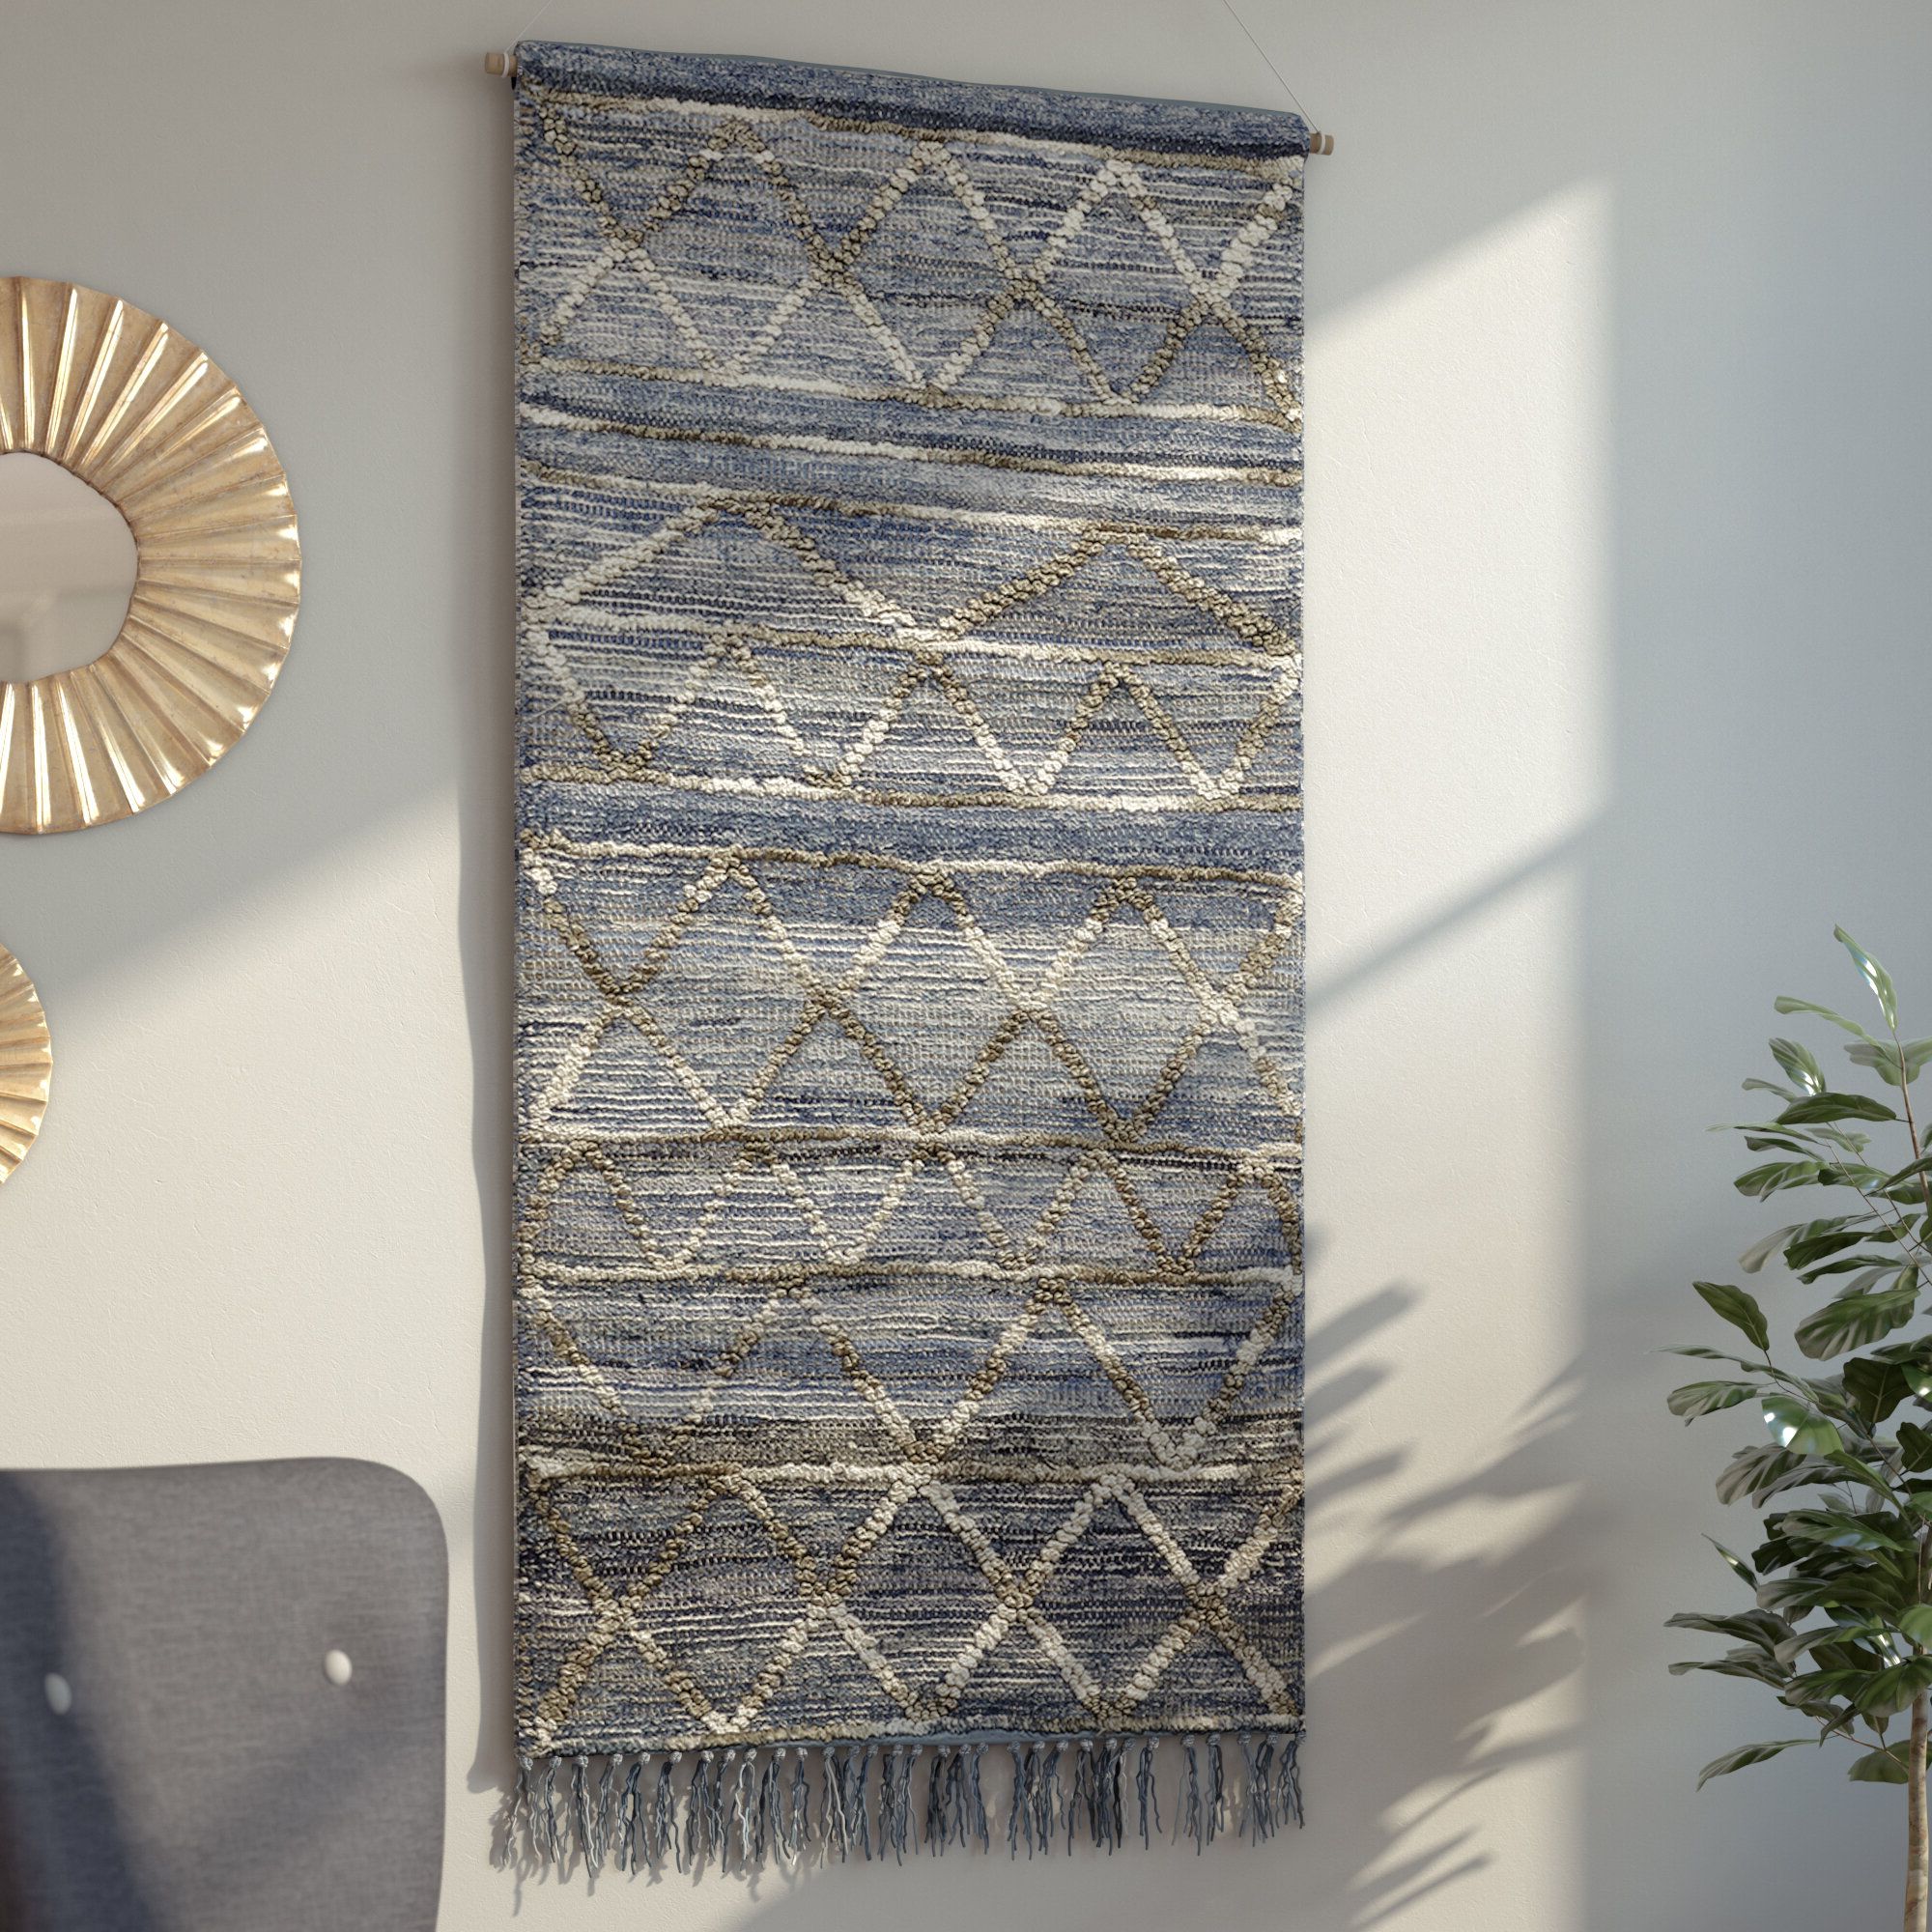 Blended Fabric Wall Hanging With Hanging Accessories Pertaining To Most Recently Released Blended Fabric Wall Hangings With Hanging Accessories Included (View 1 of 20)